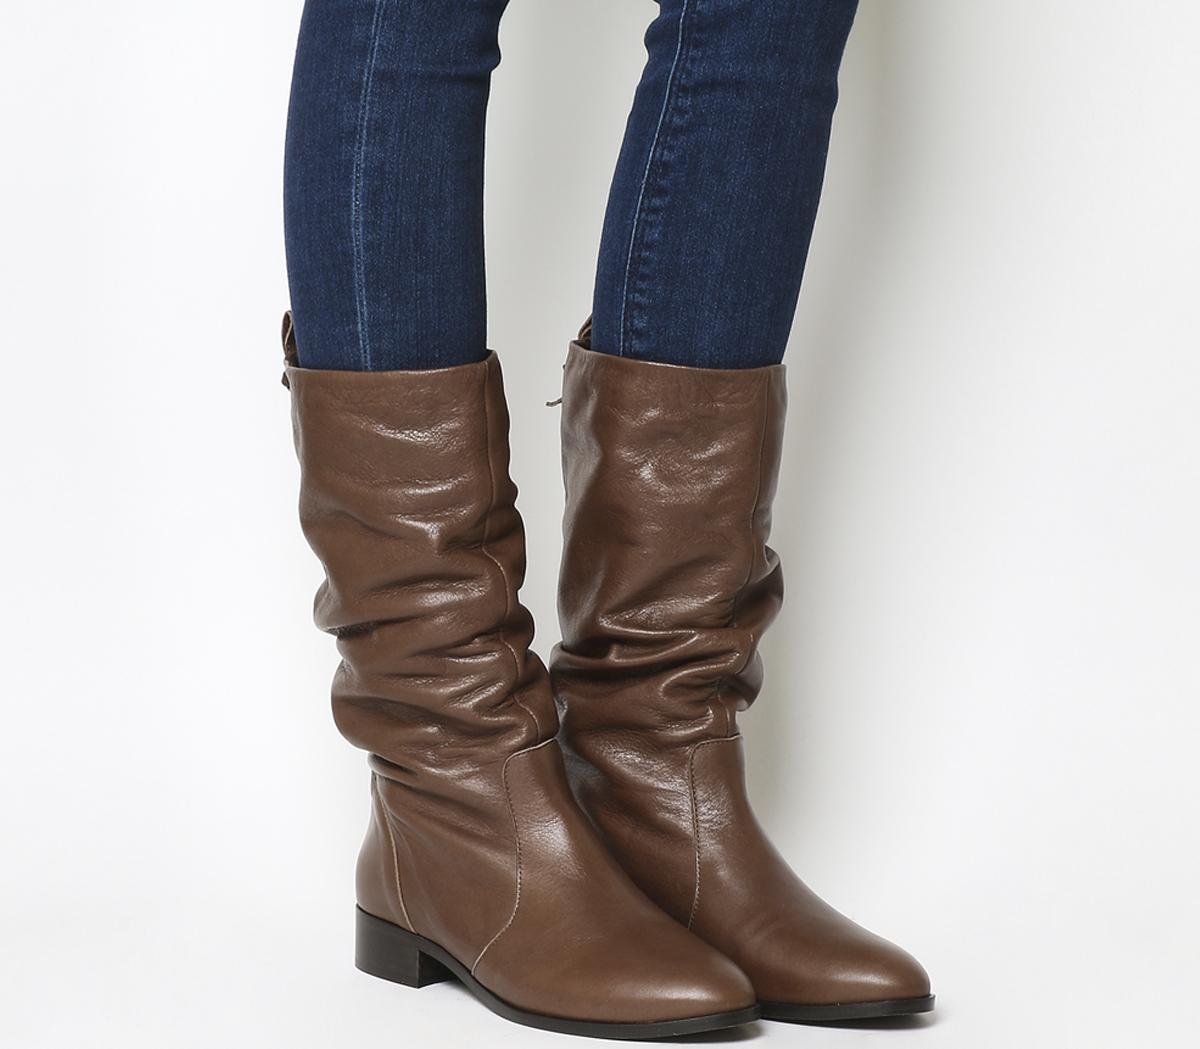 leather calf boots uk